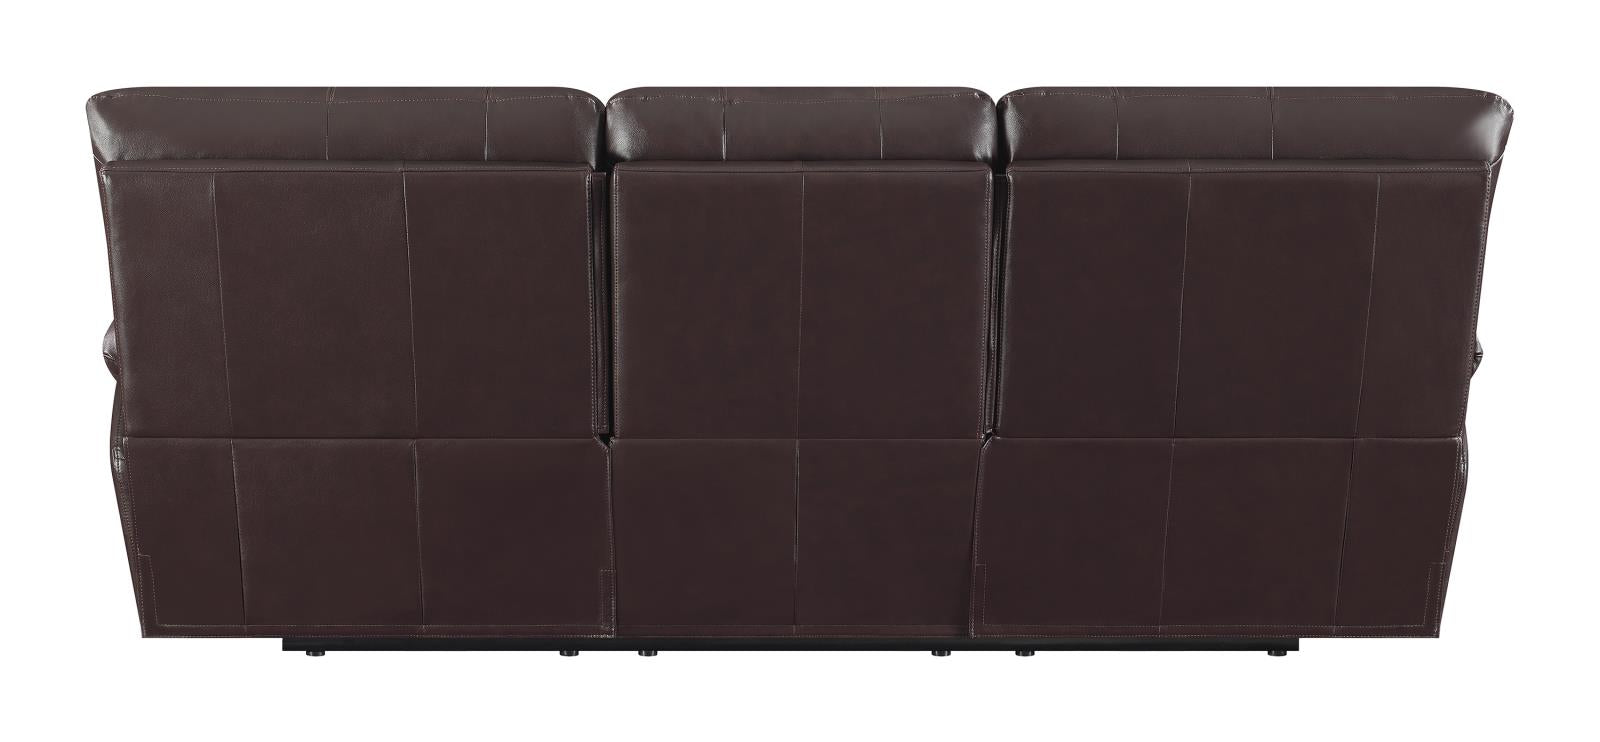 Clifford Pillow Top Arm Motion Sofa Chocolate - What A Room